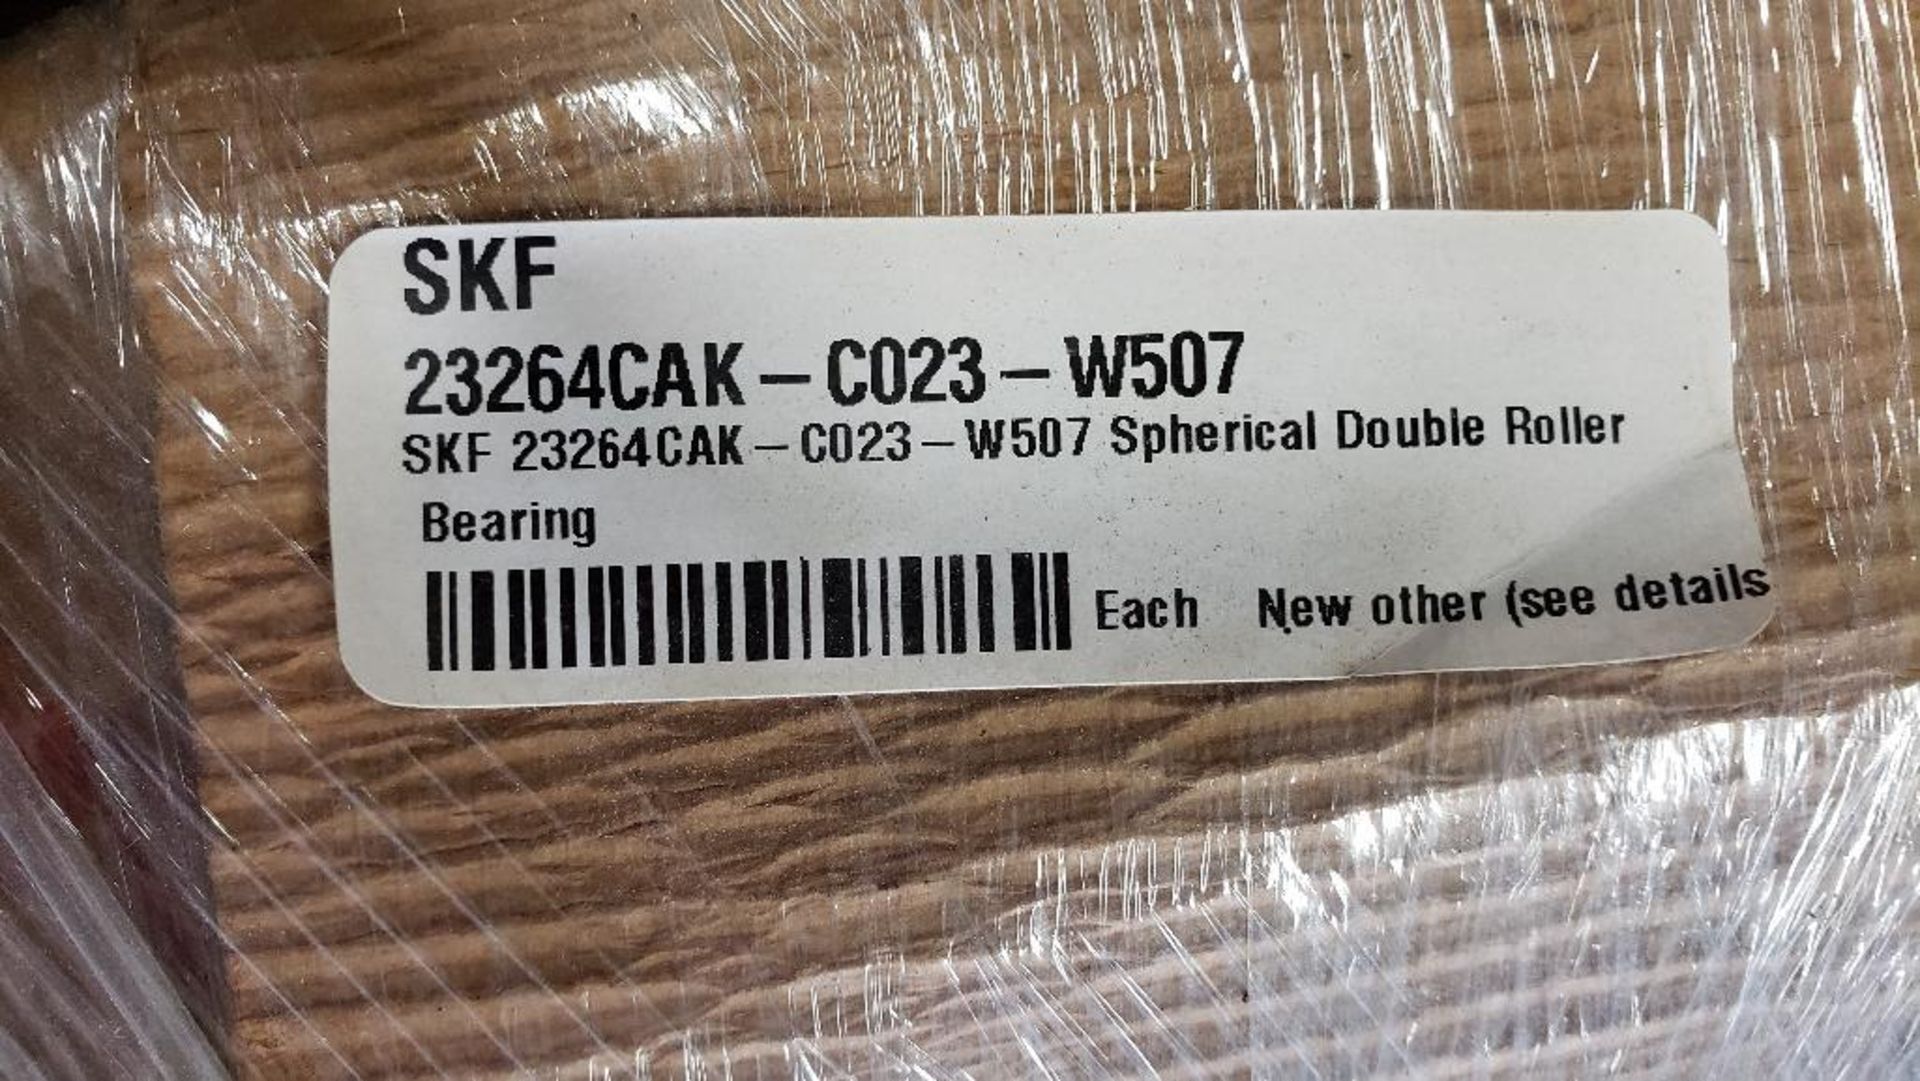 SKF super precision large capacity bearing. Part number 23264 CAK-C023-W507. New as pictured. - Image 2 of 3